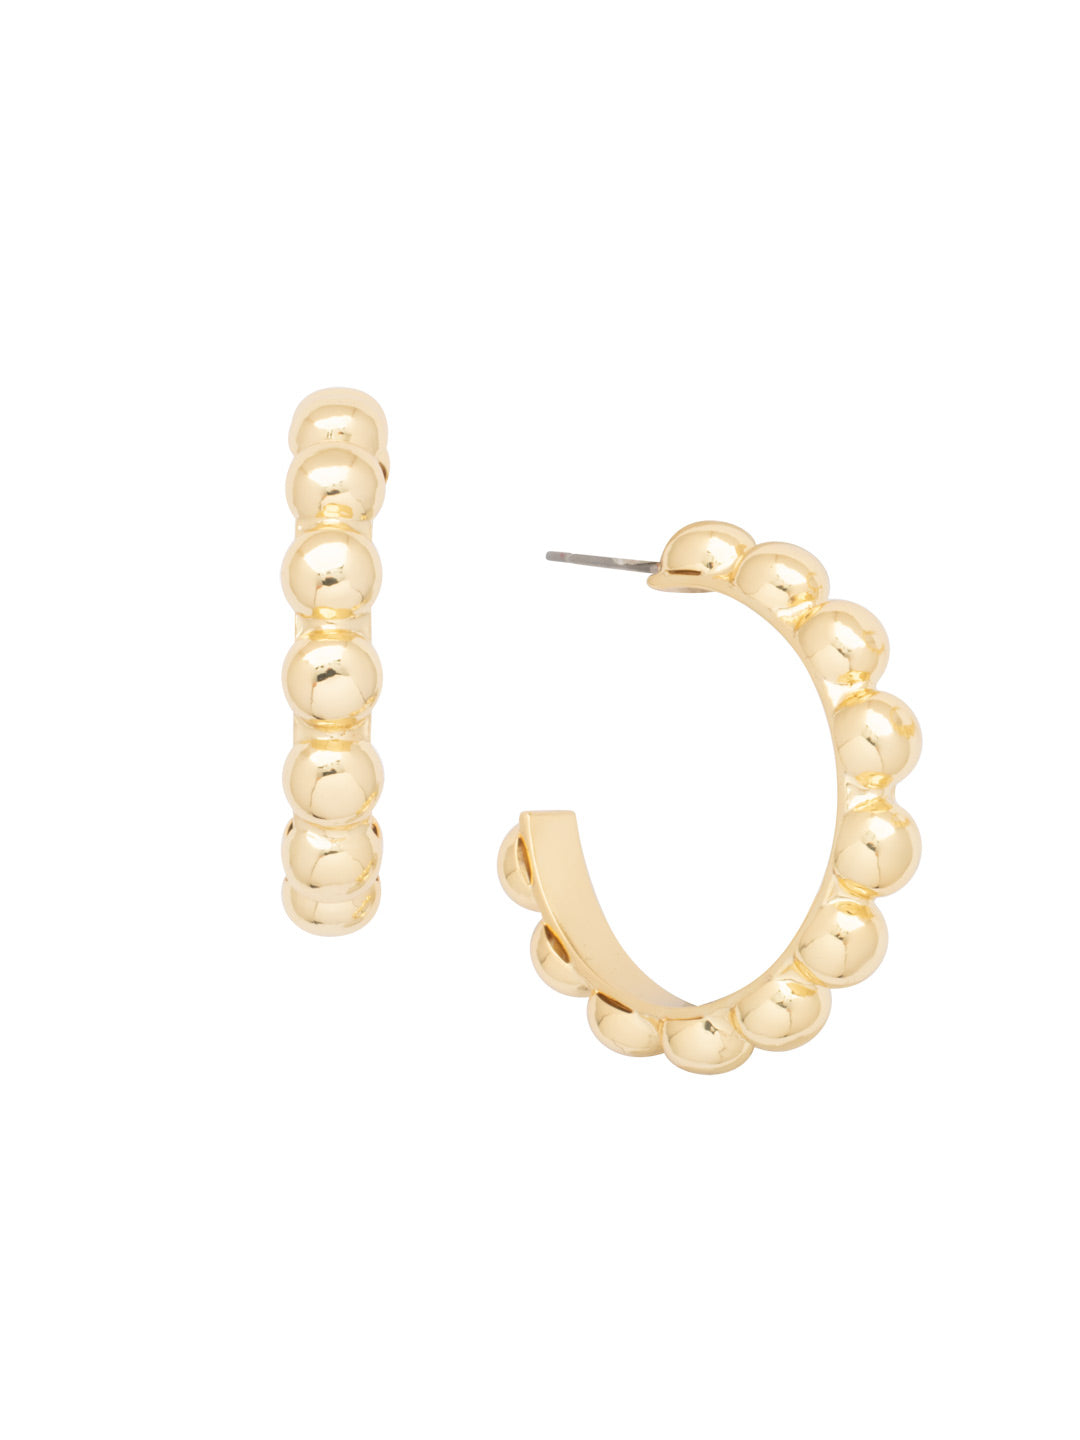 Bauble Hoop Earrings - 4EFL12BGMTL - <p>The Bauble Hoop Earrings feature round metal studs on an open-back hoop on a post. From Sorrelli's Bare Metallic collection in our Bright Gold-tone finish.</p>